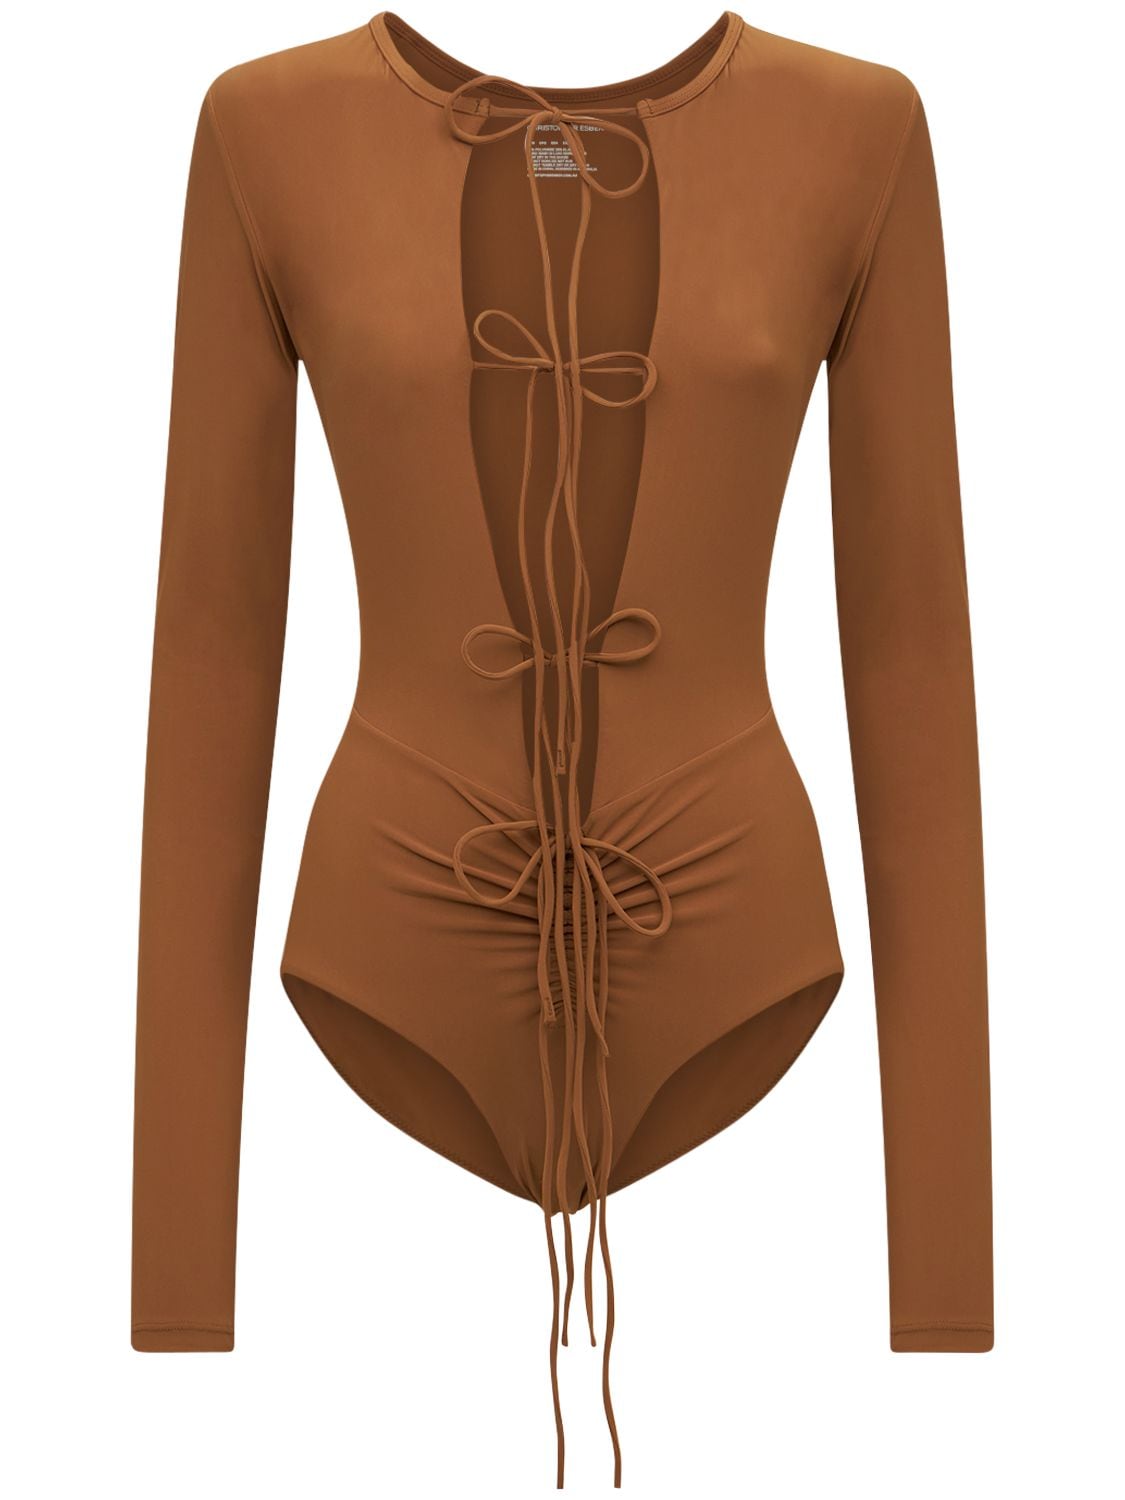 Long Sleeved Cut Out One Piece Swimsuit